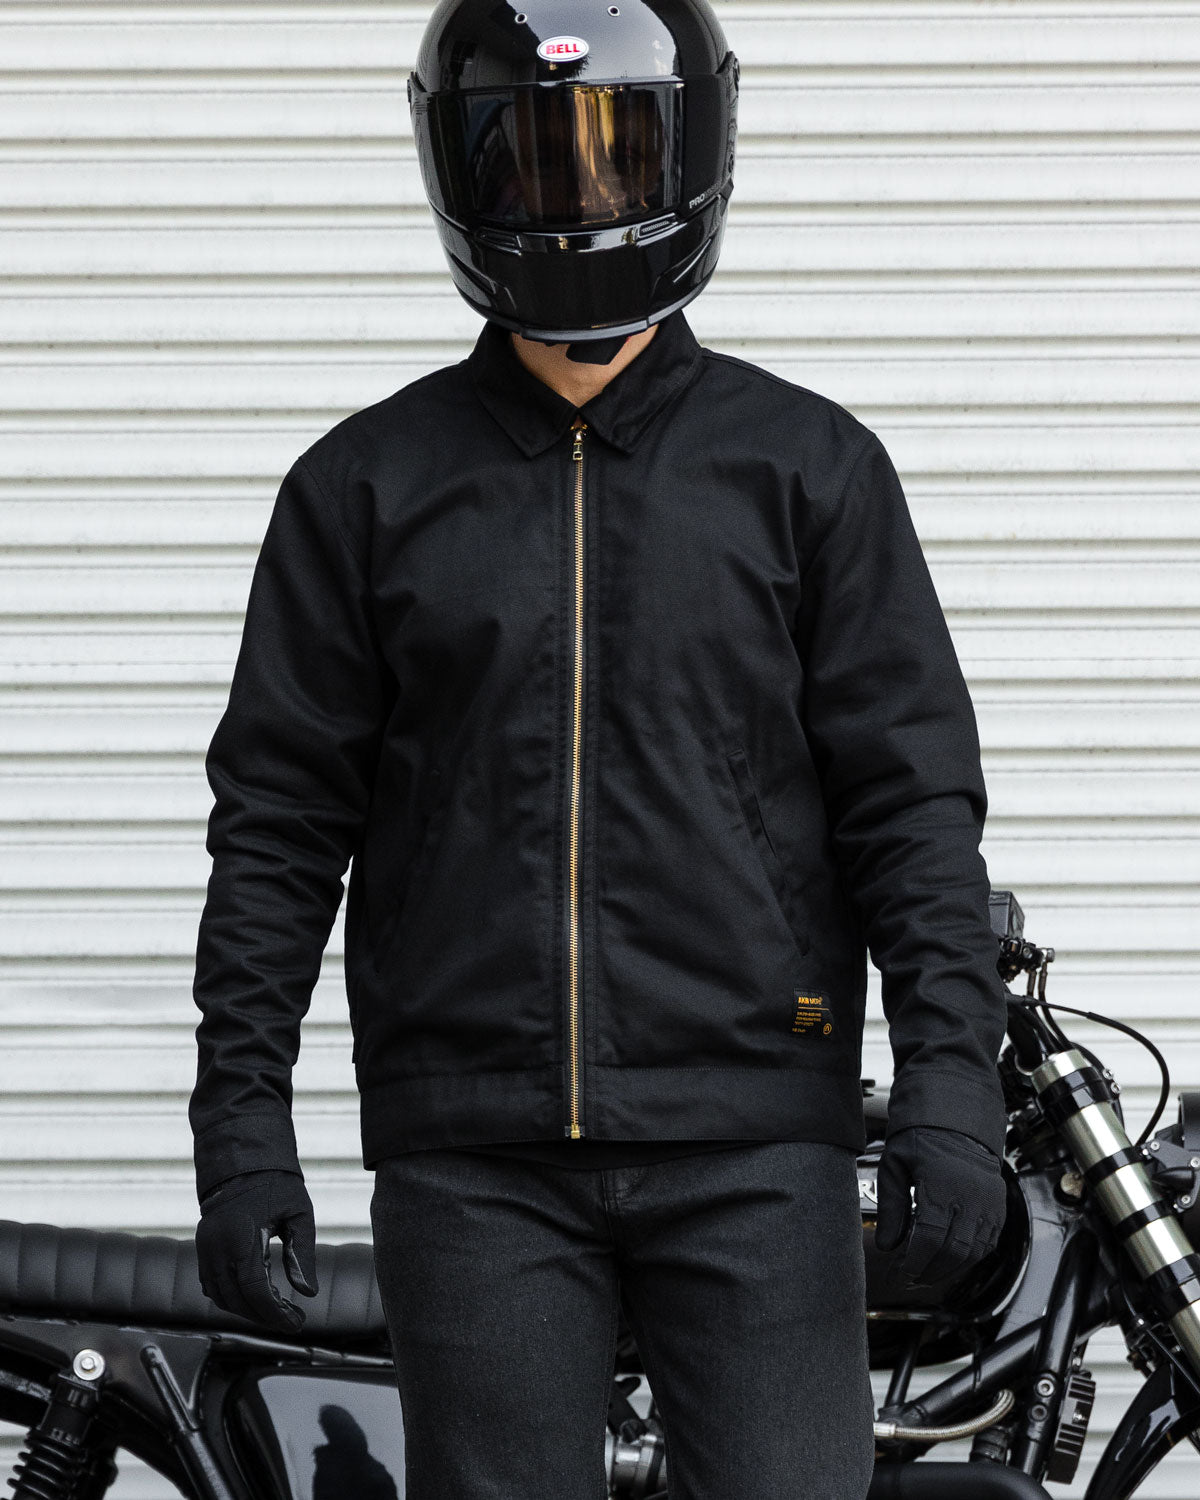 WRENCH MOTORCYCLE JACKET